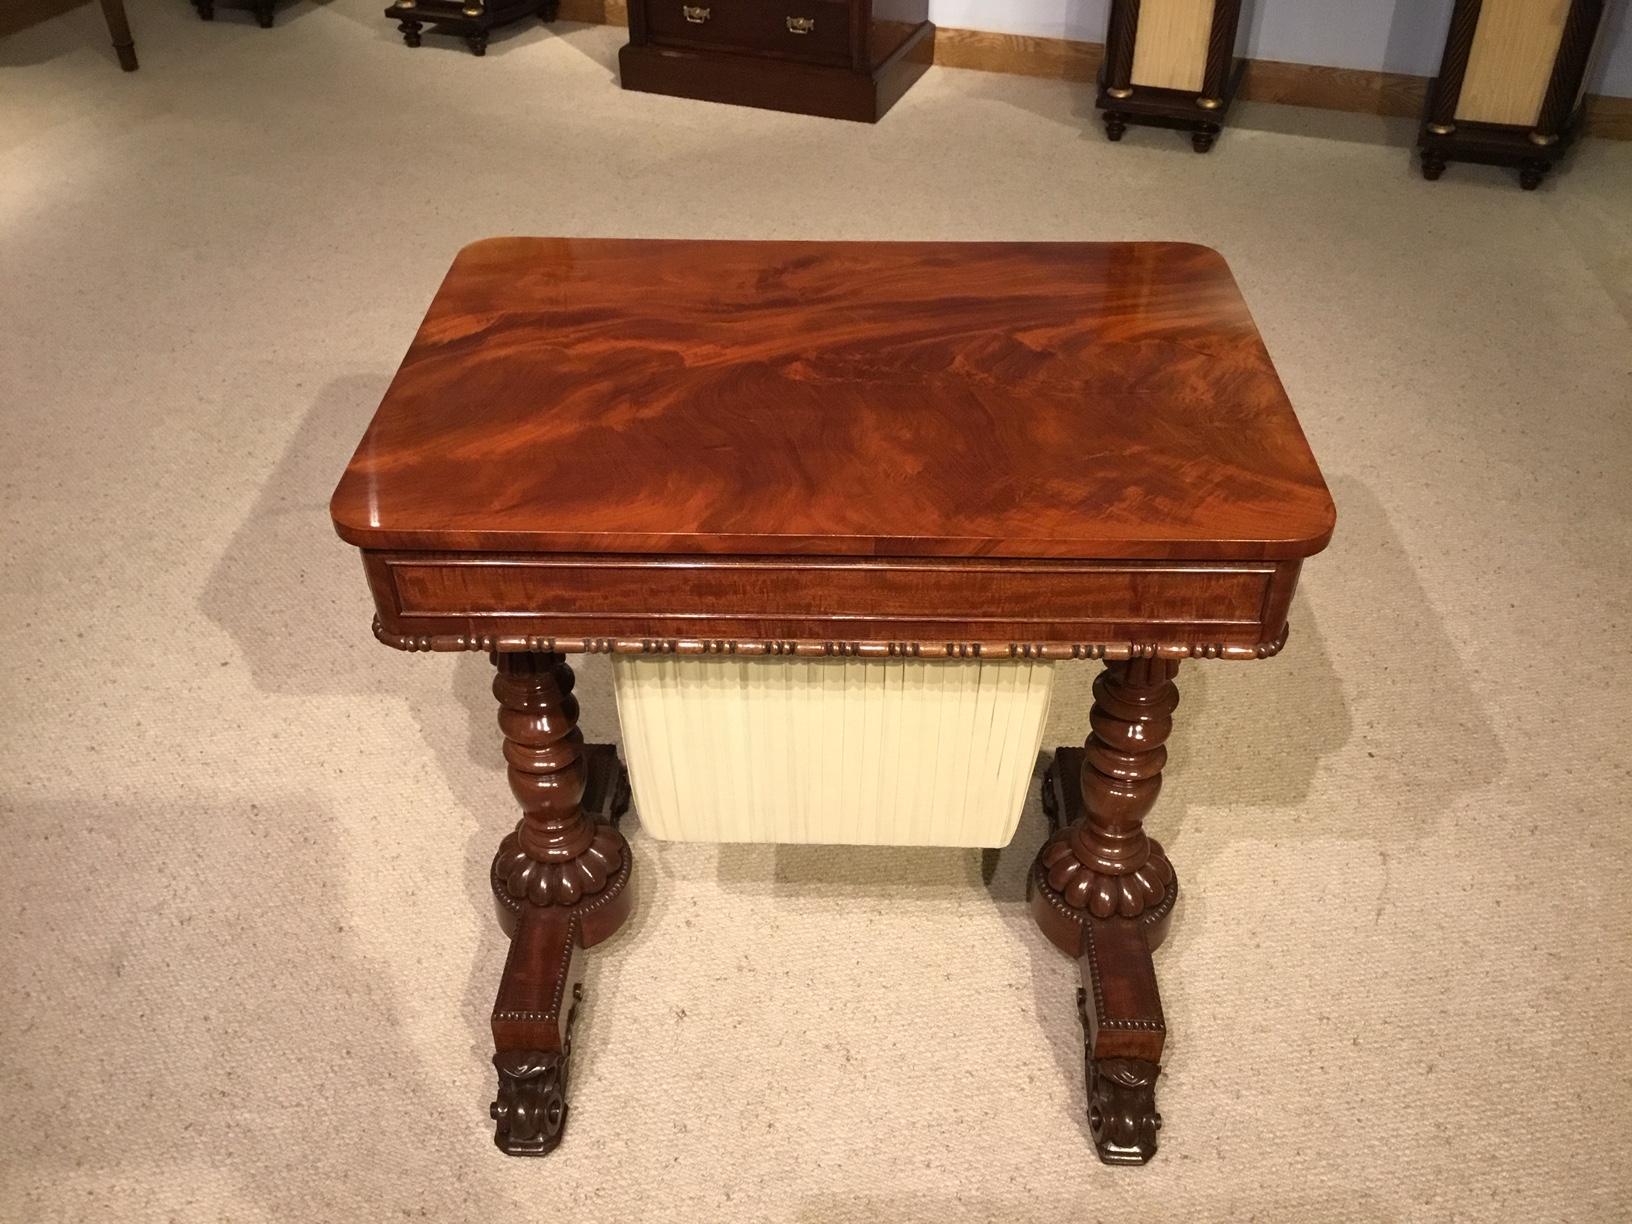 A superb Regency period flame mahogany antique work table. Having a rectangular top veneered in the finest flamed mahogany veneers which are repeated in the frieze and drawer fronts. With a mahogany lined drawer in each end, one fitted for sewing